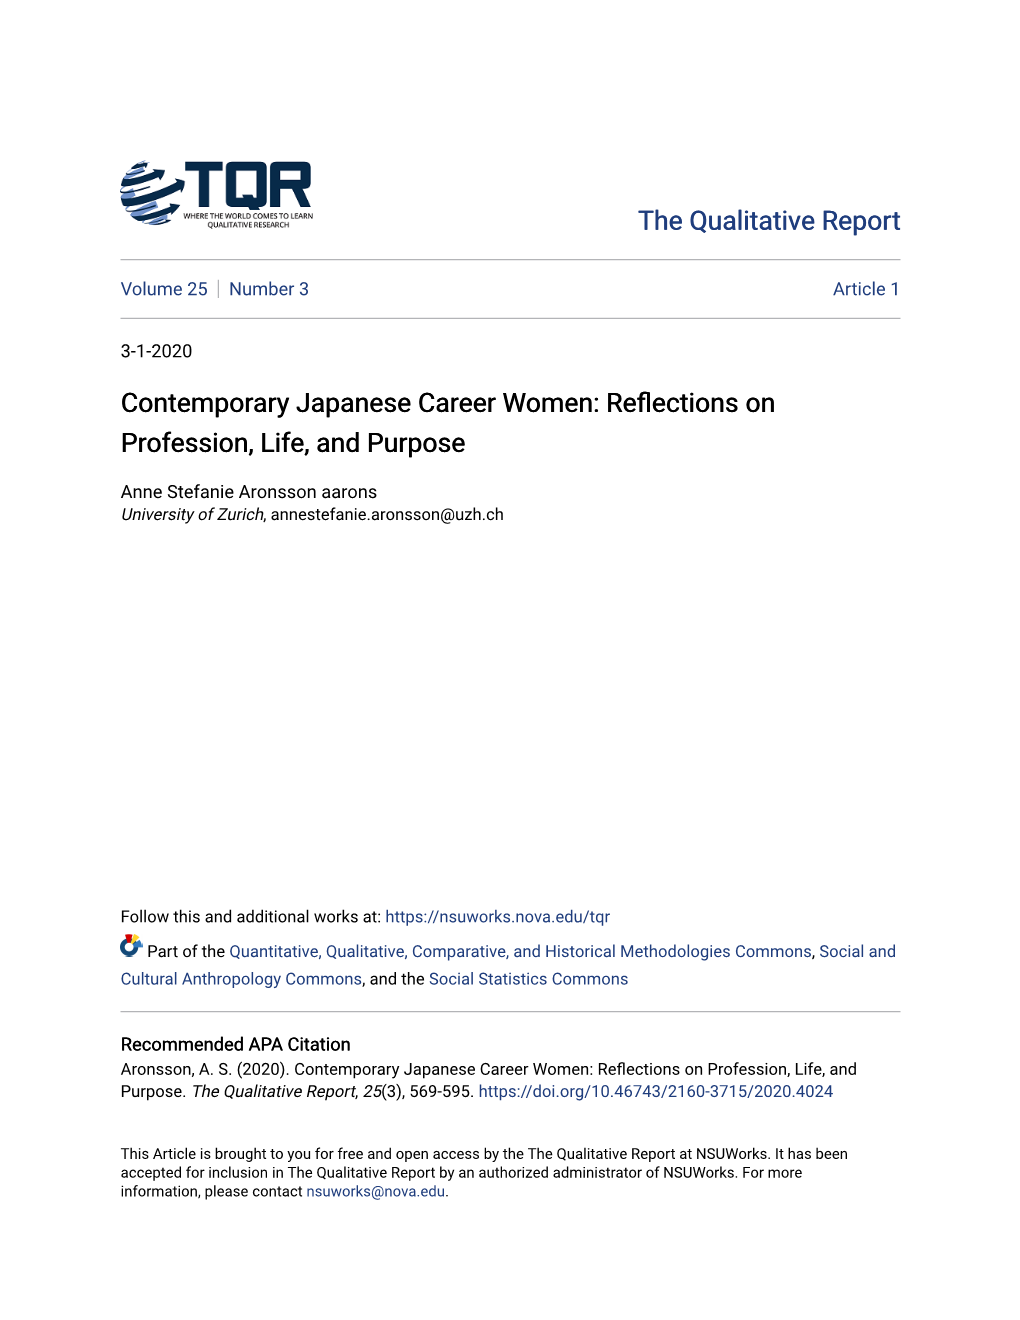 Contemporary Japanese Career Women: Reflections on Profession, Life, and Purpose